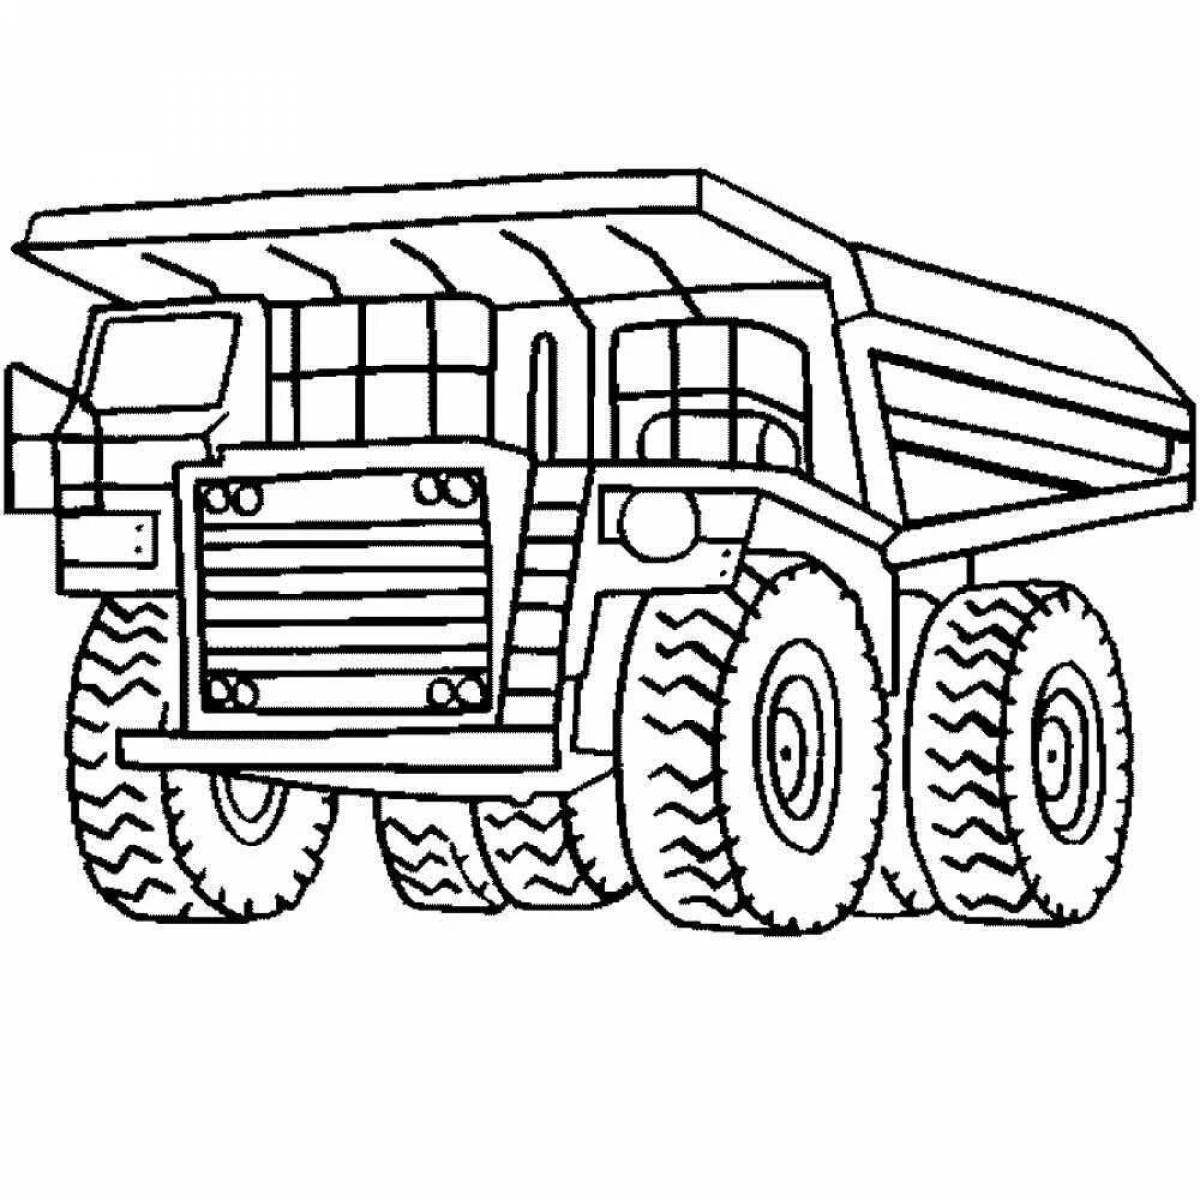 Radiant kamaz dump truck coloring page